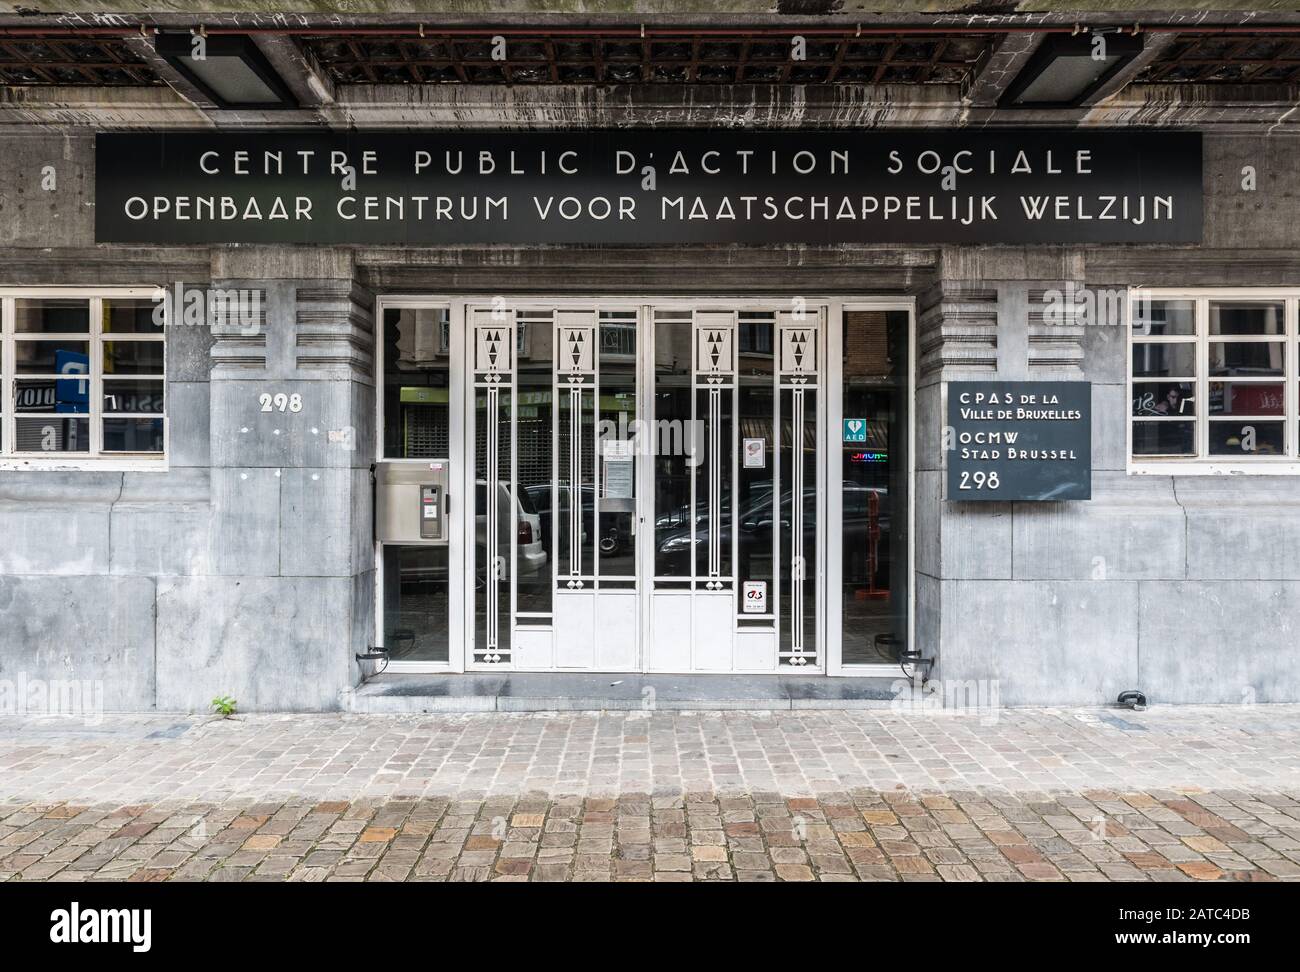 Brussels Marollen, Brussels Capital Region / Belgium - 09 07 2019: The OCMW CPAS social security administration of brussels city Stock Photo